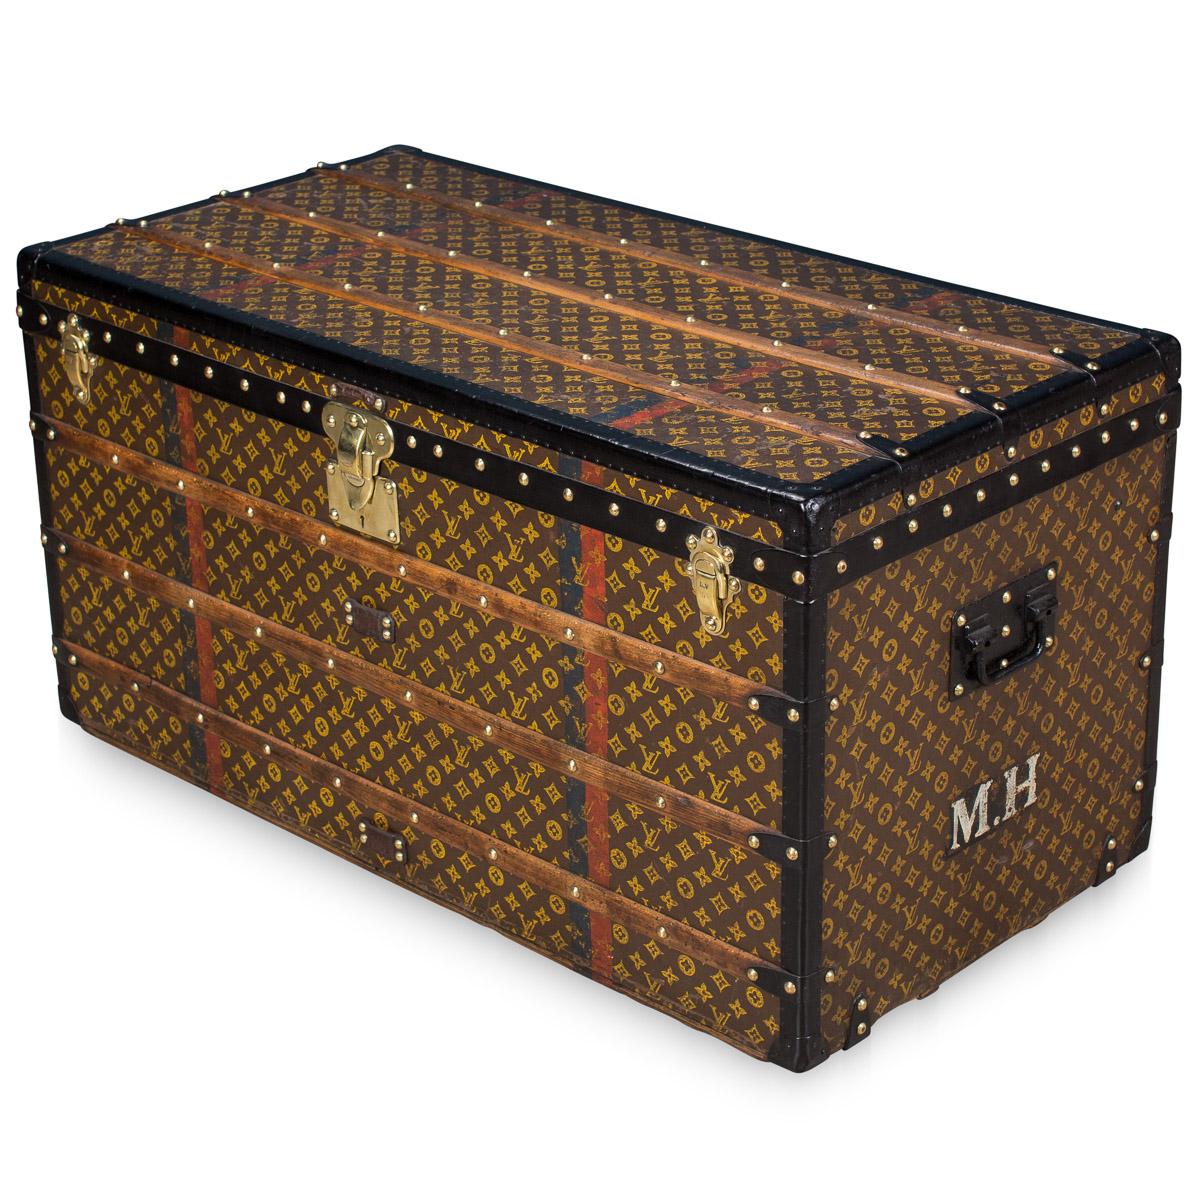 A superb example of an early 20th century Louis Vuitton trunk in the world famous monogrammed LV canvas. This trunk is in exceptionally very condition and harks back to times of passenger ships and 1st class travel of bygone eras. A wonderful